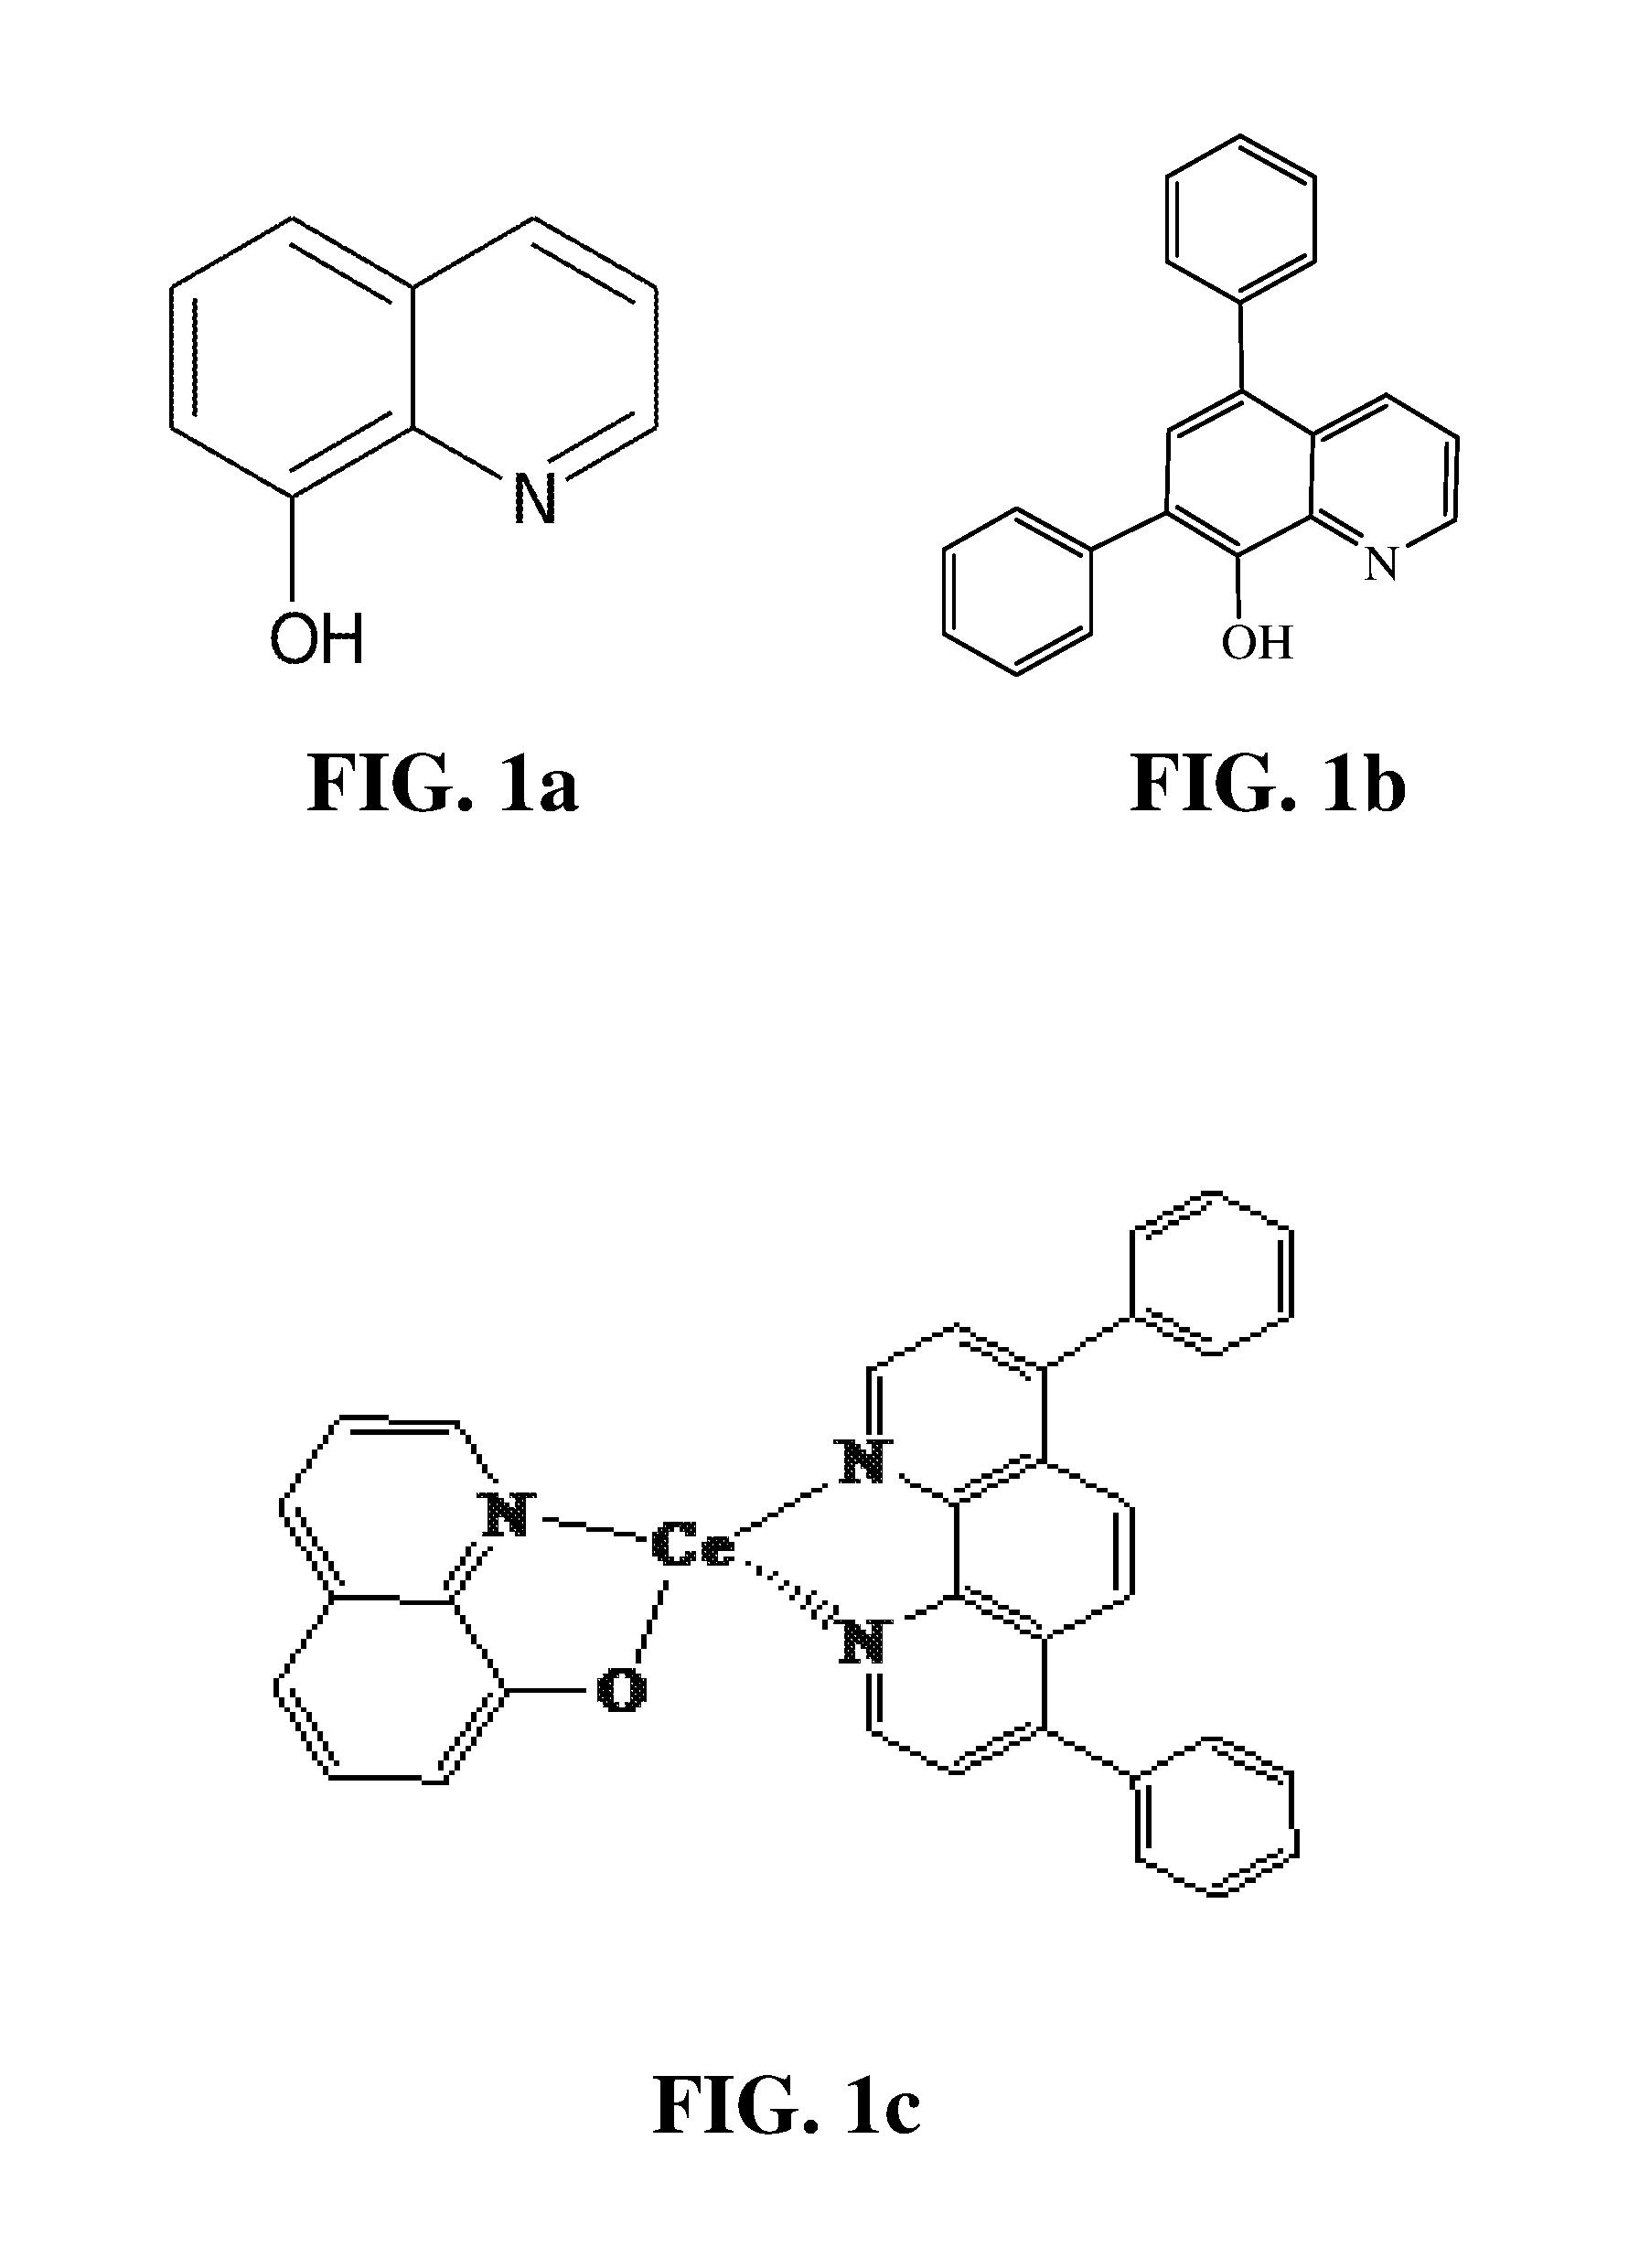 Composite proton conducting electrolyte with improved additives for fuel cells